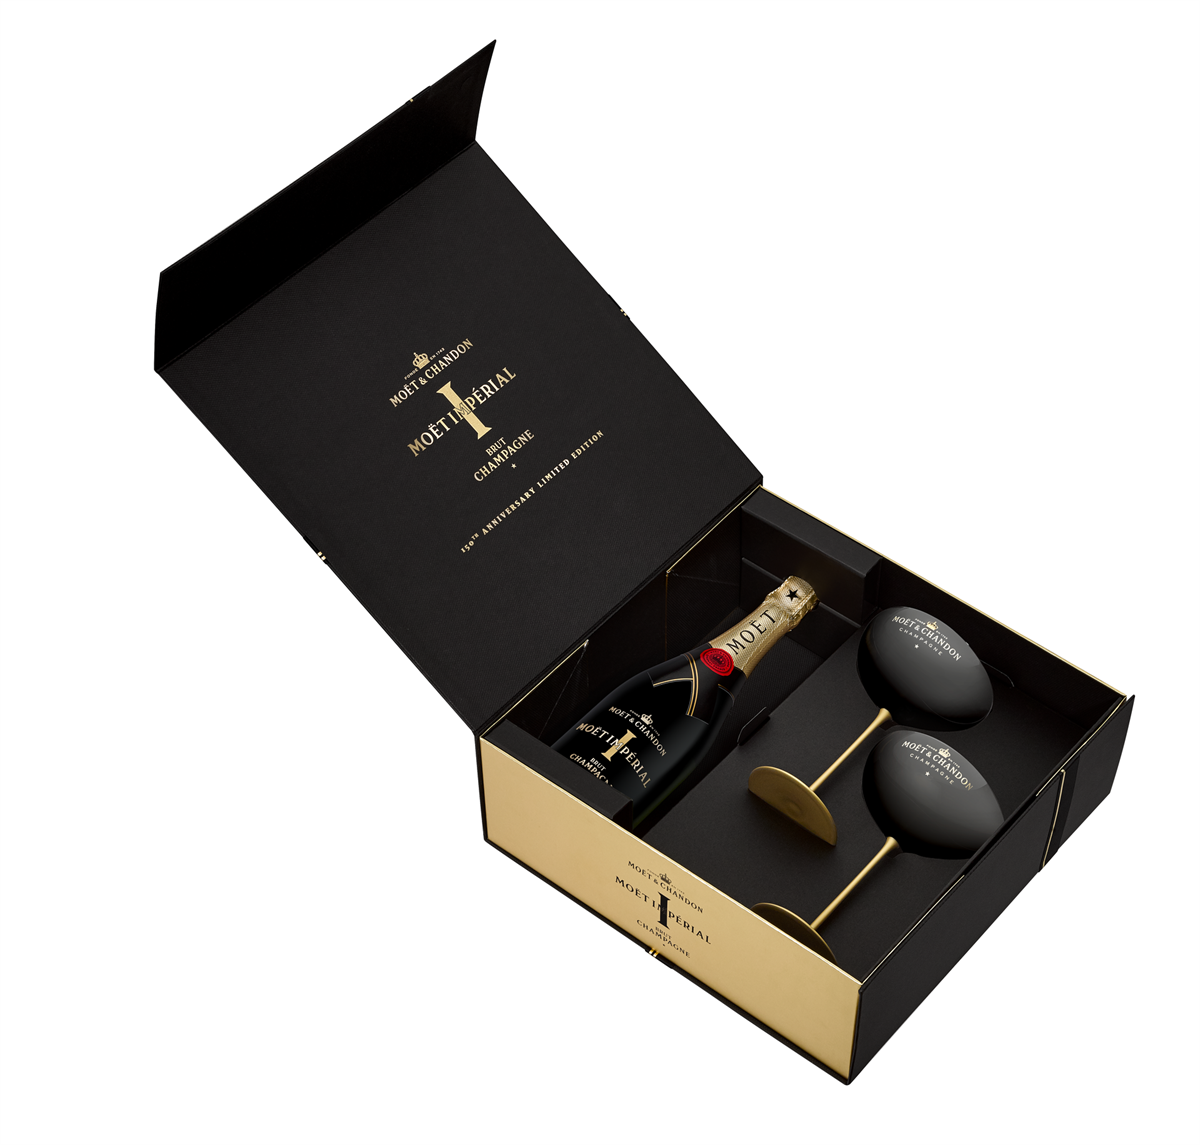 Moët-Chandon-Giftpack-1bouteille-2-coupes EUR 70_02